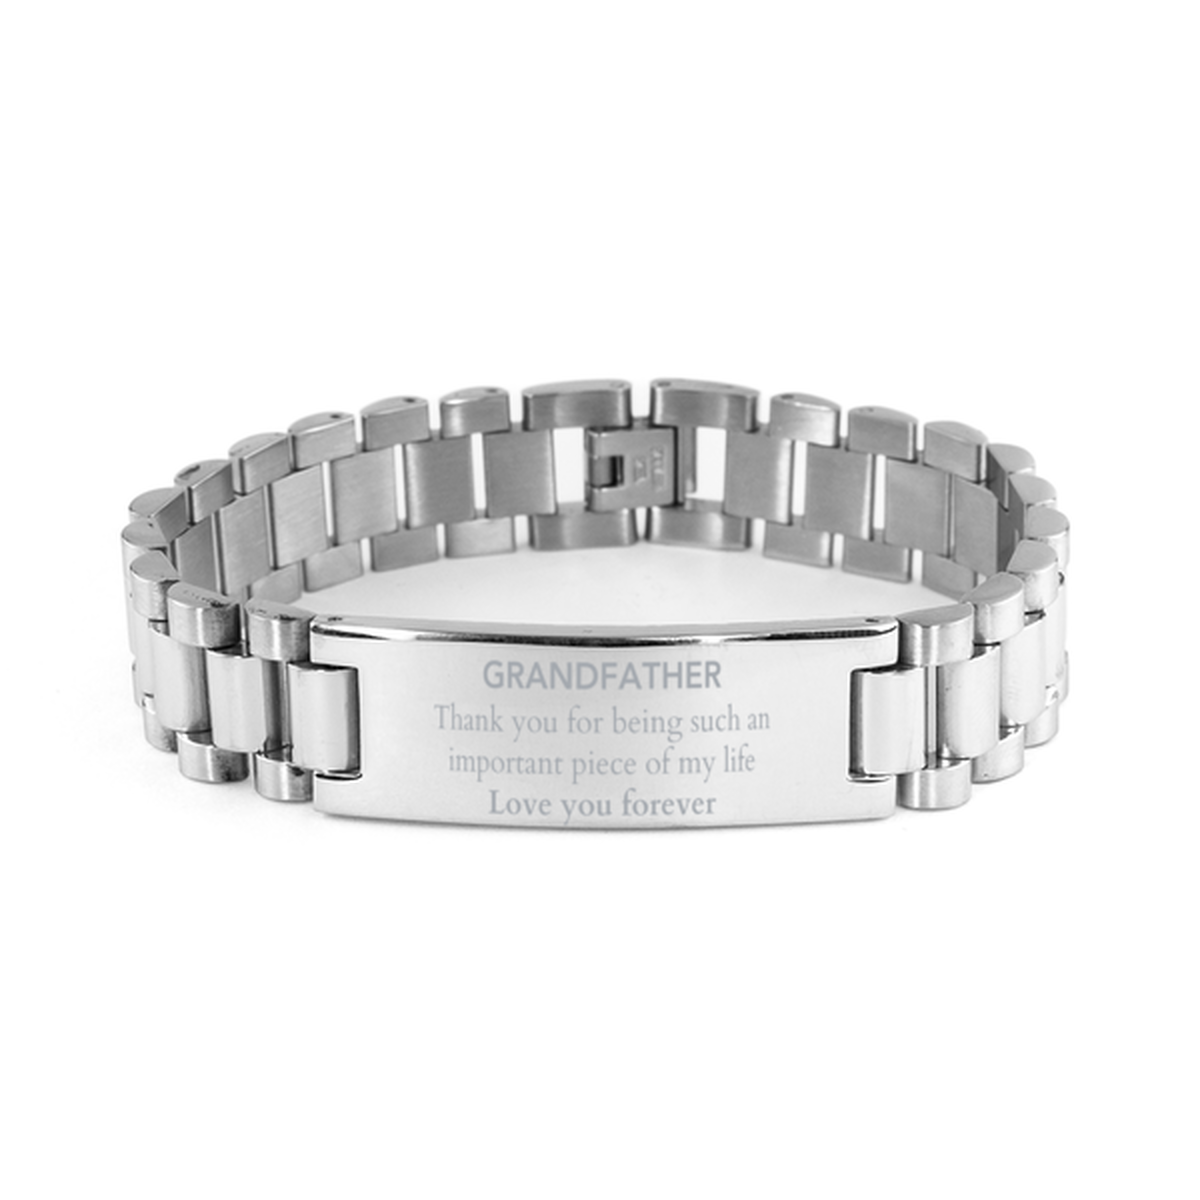 Appropriate Grandfather Ladder Stainless Steel Bracelet Epic Birthday Gifts for Grandfather Thank you for being such an important piece of my life Grandfather Christmas Mothers Fathers Day